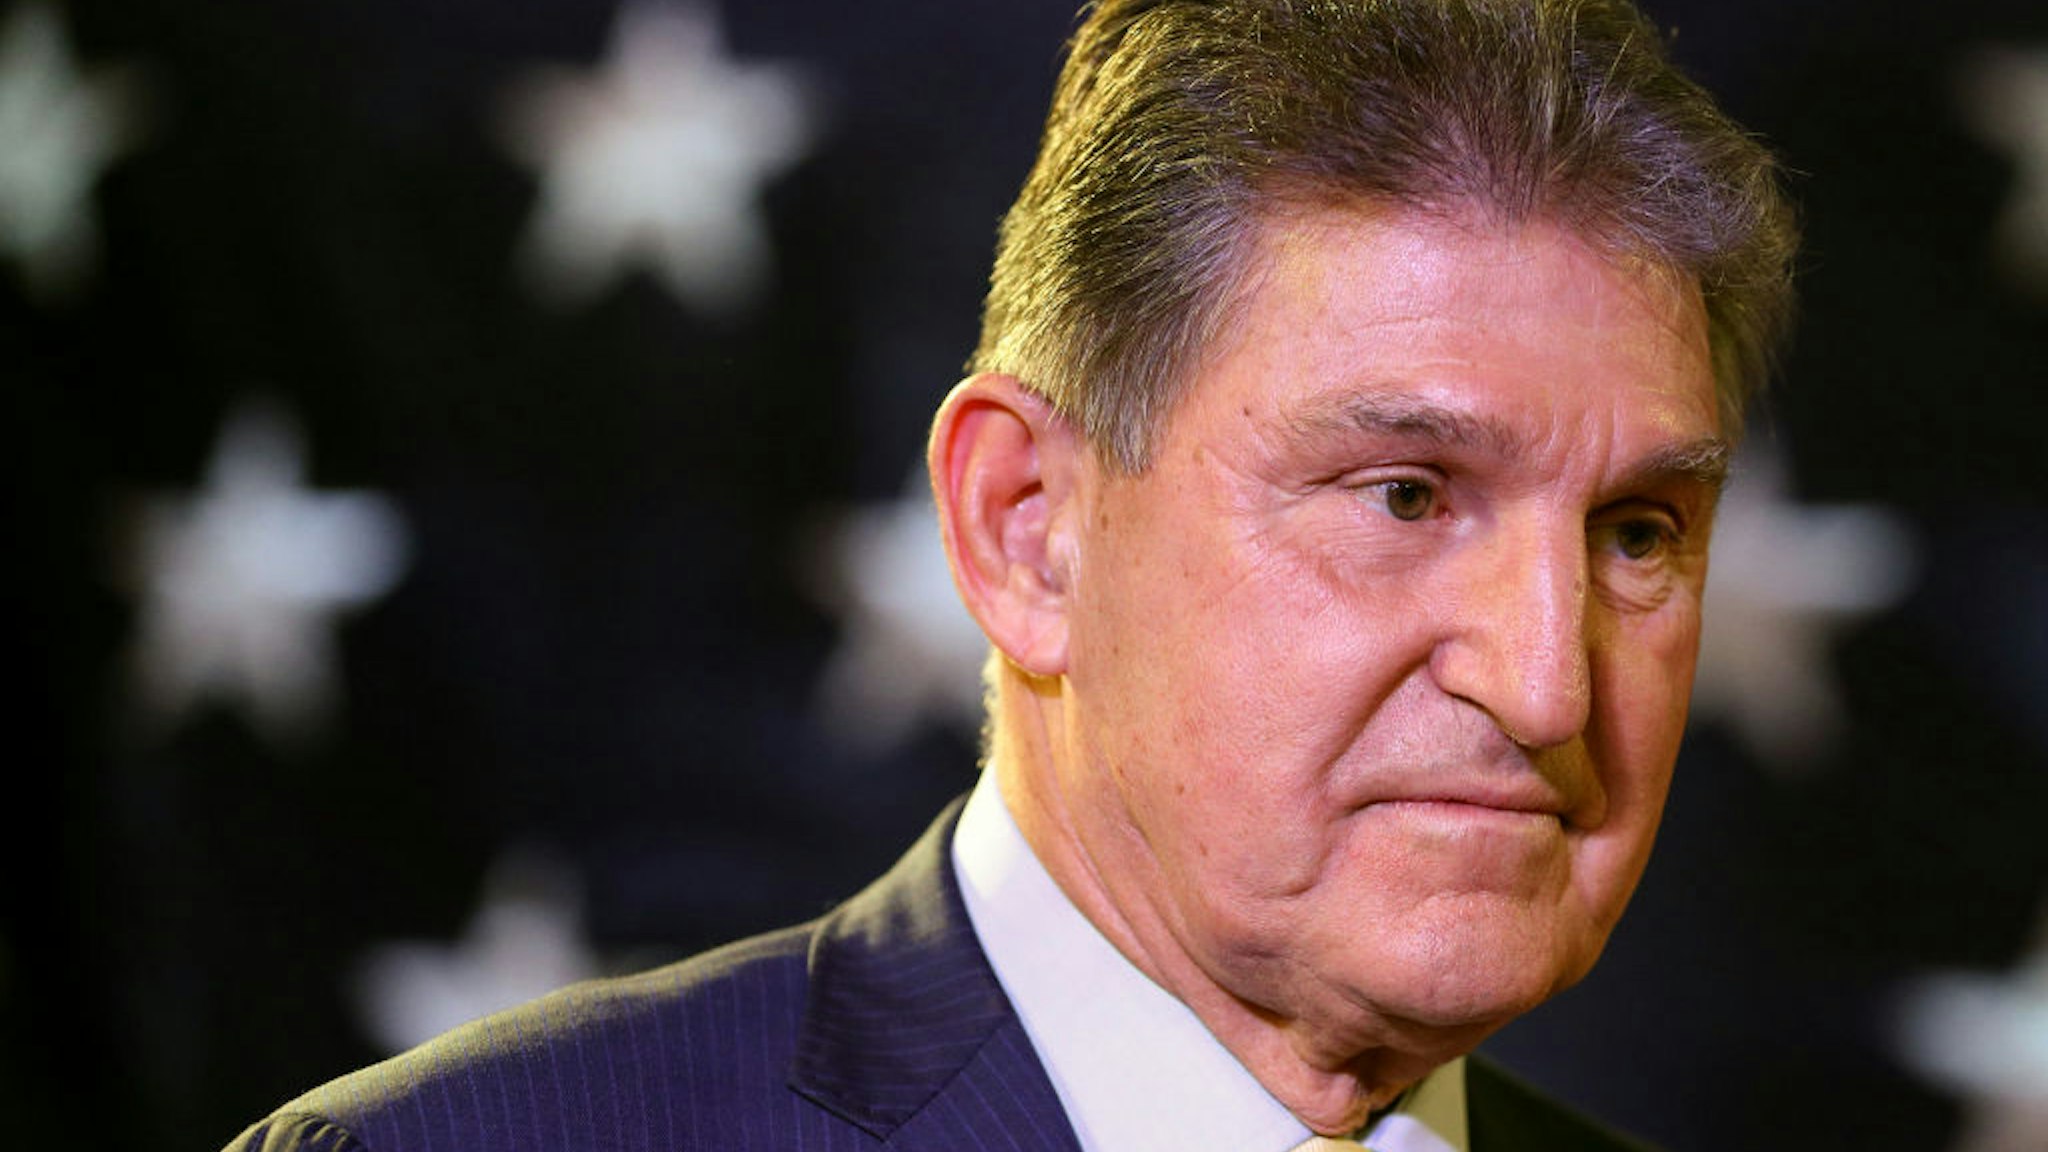 Joe Manchin celebrates at his election day victory party at the Embassy Suites on November 6, 2018